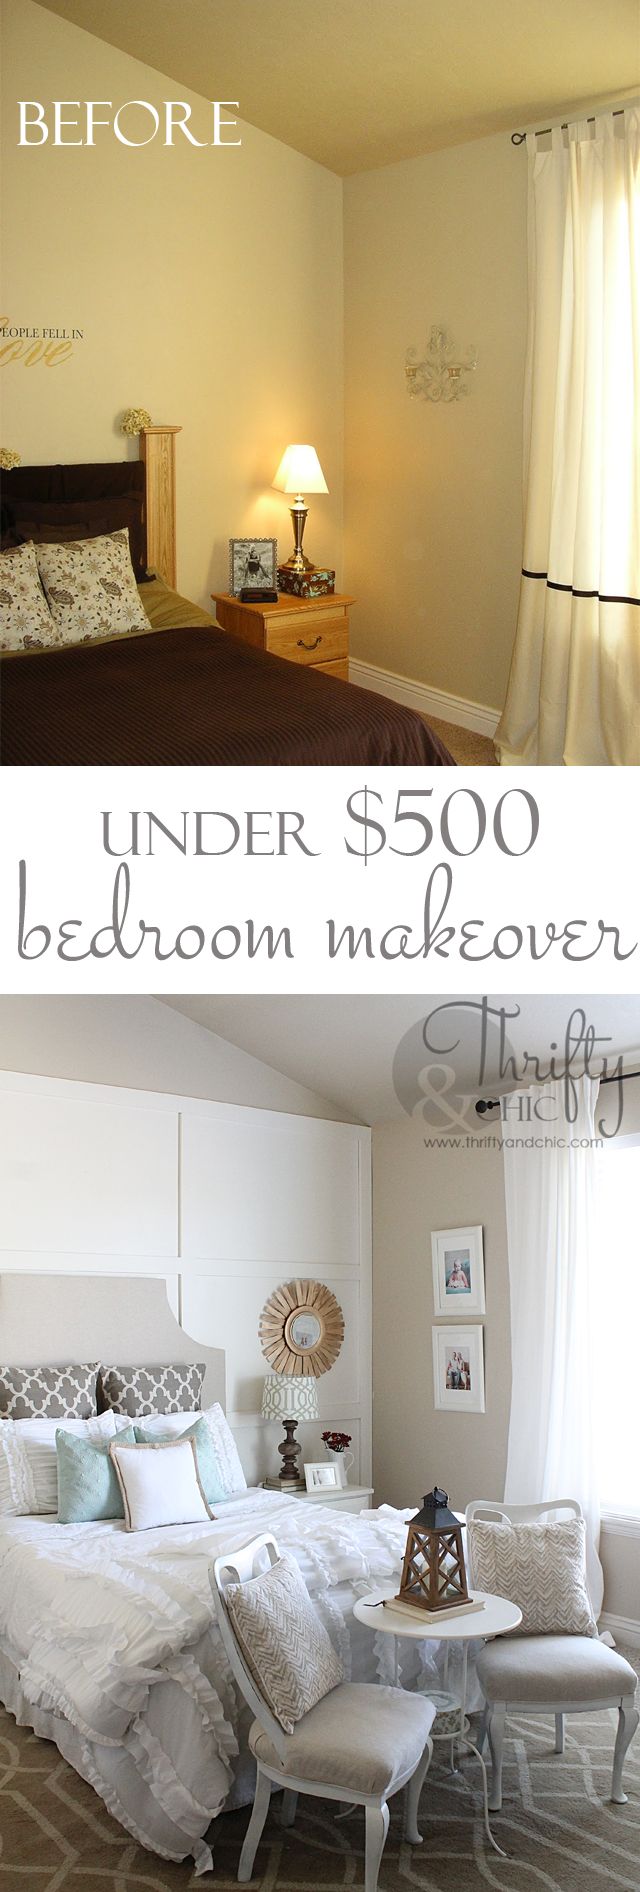 Square Board and Batten Wall Treatment and Master Bedroom Makeover